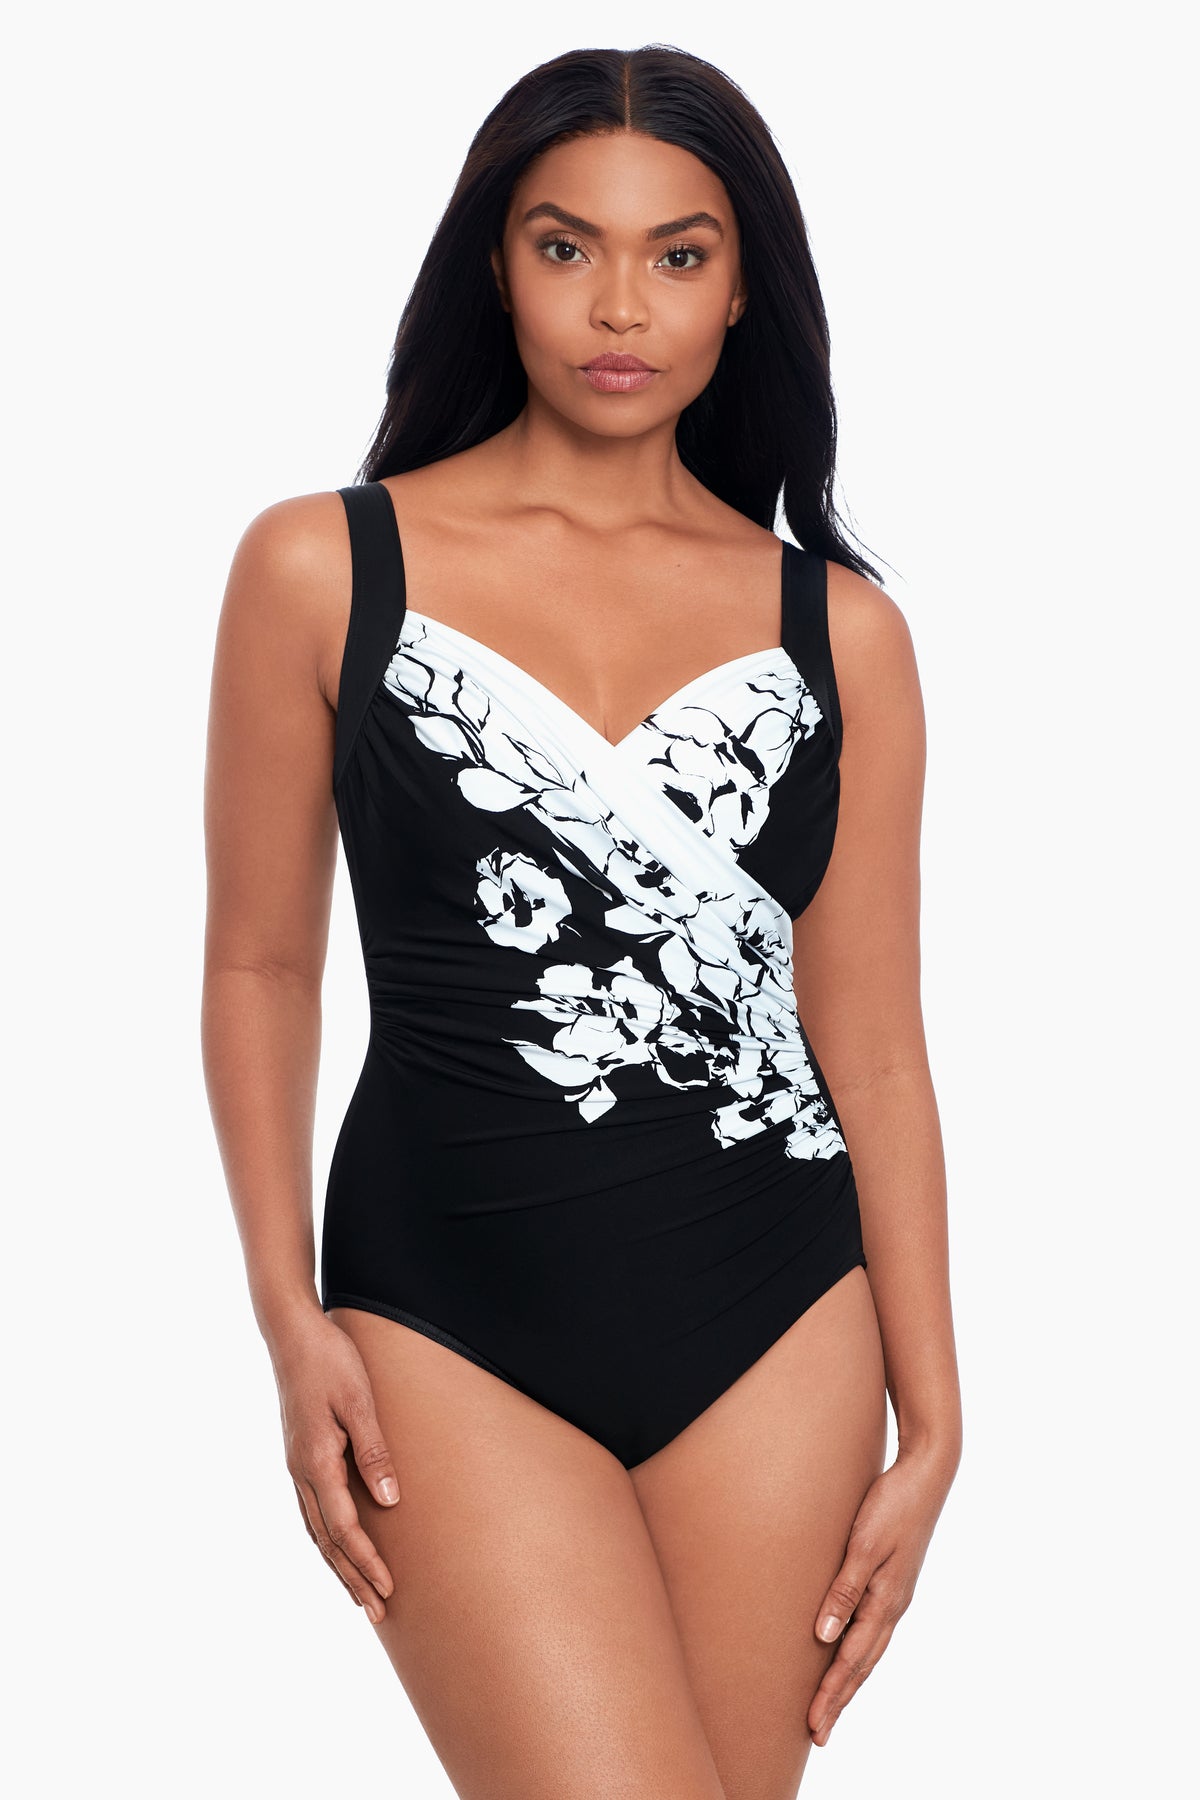 Must Haves Oceanus One Piece Swimsuit DDD-Cup